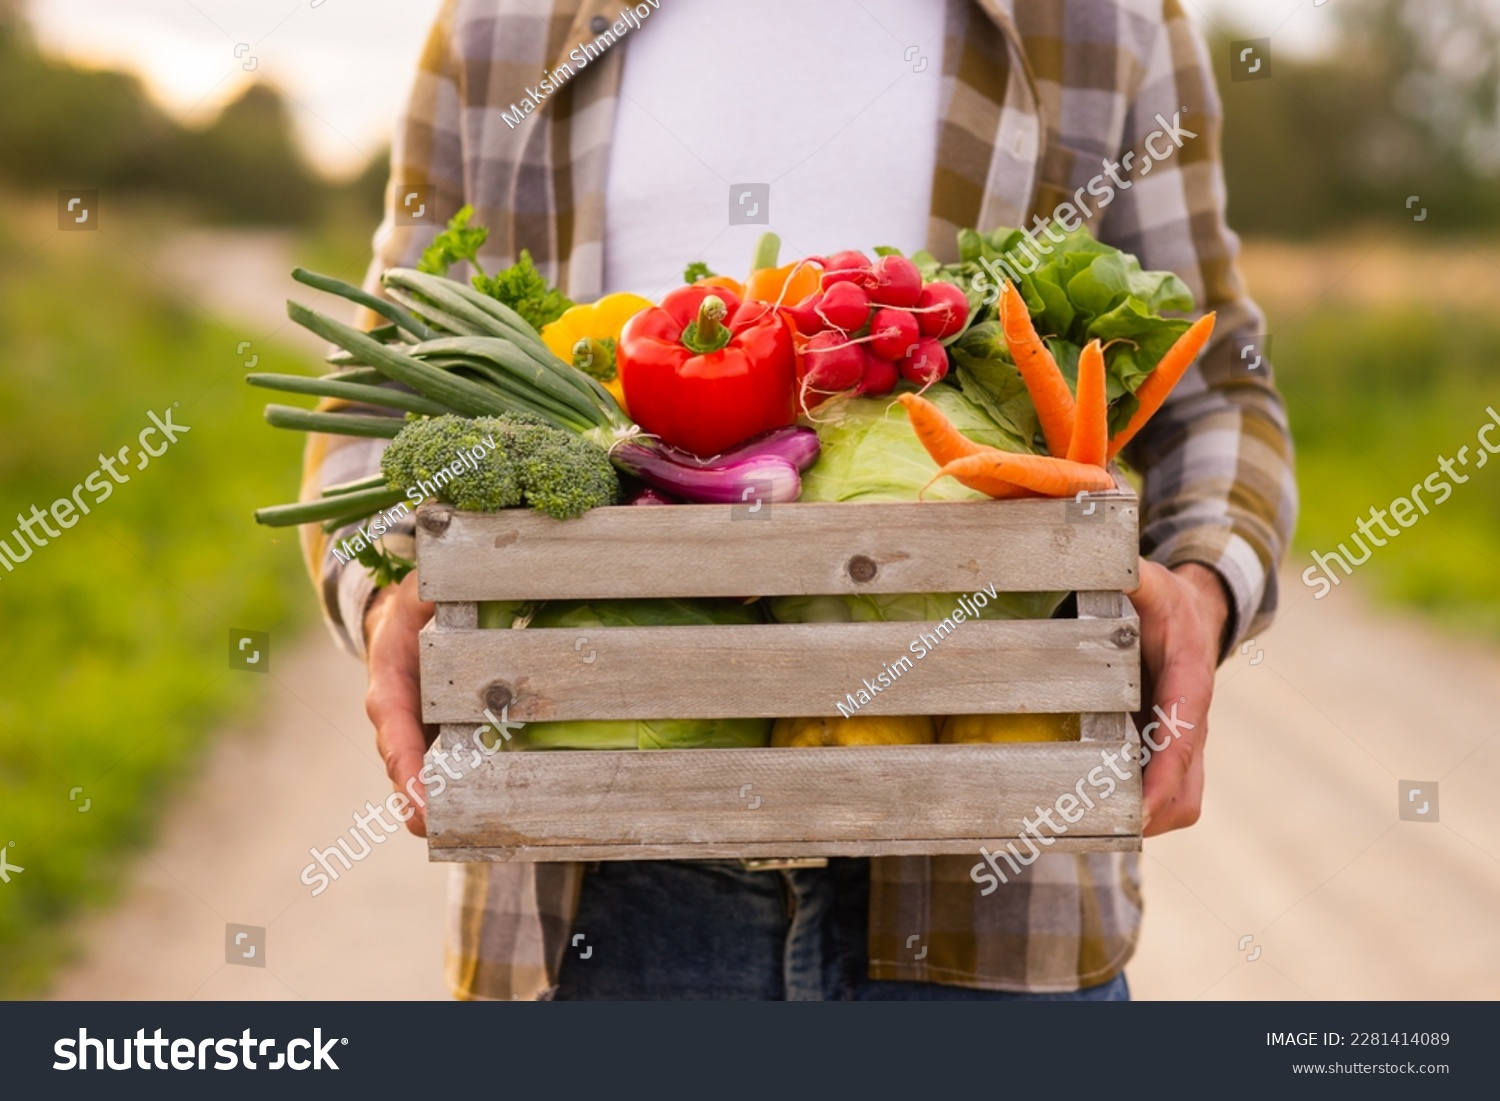 Farmer with a vegetable box in front of a sunset agricultural landscape. Man in a countryside field. Country life, food production, farming and country lifestyle concept. #2281414089